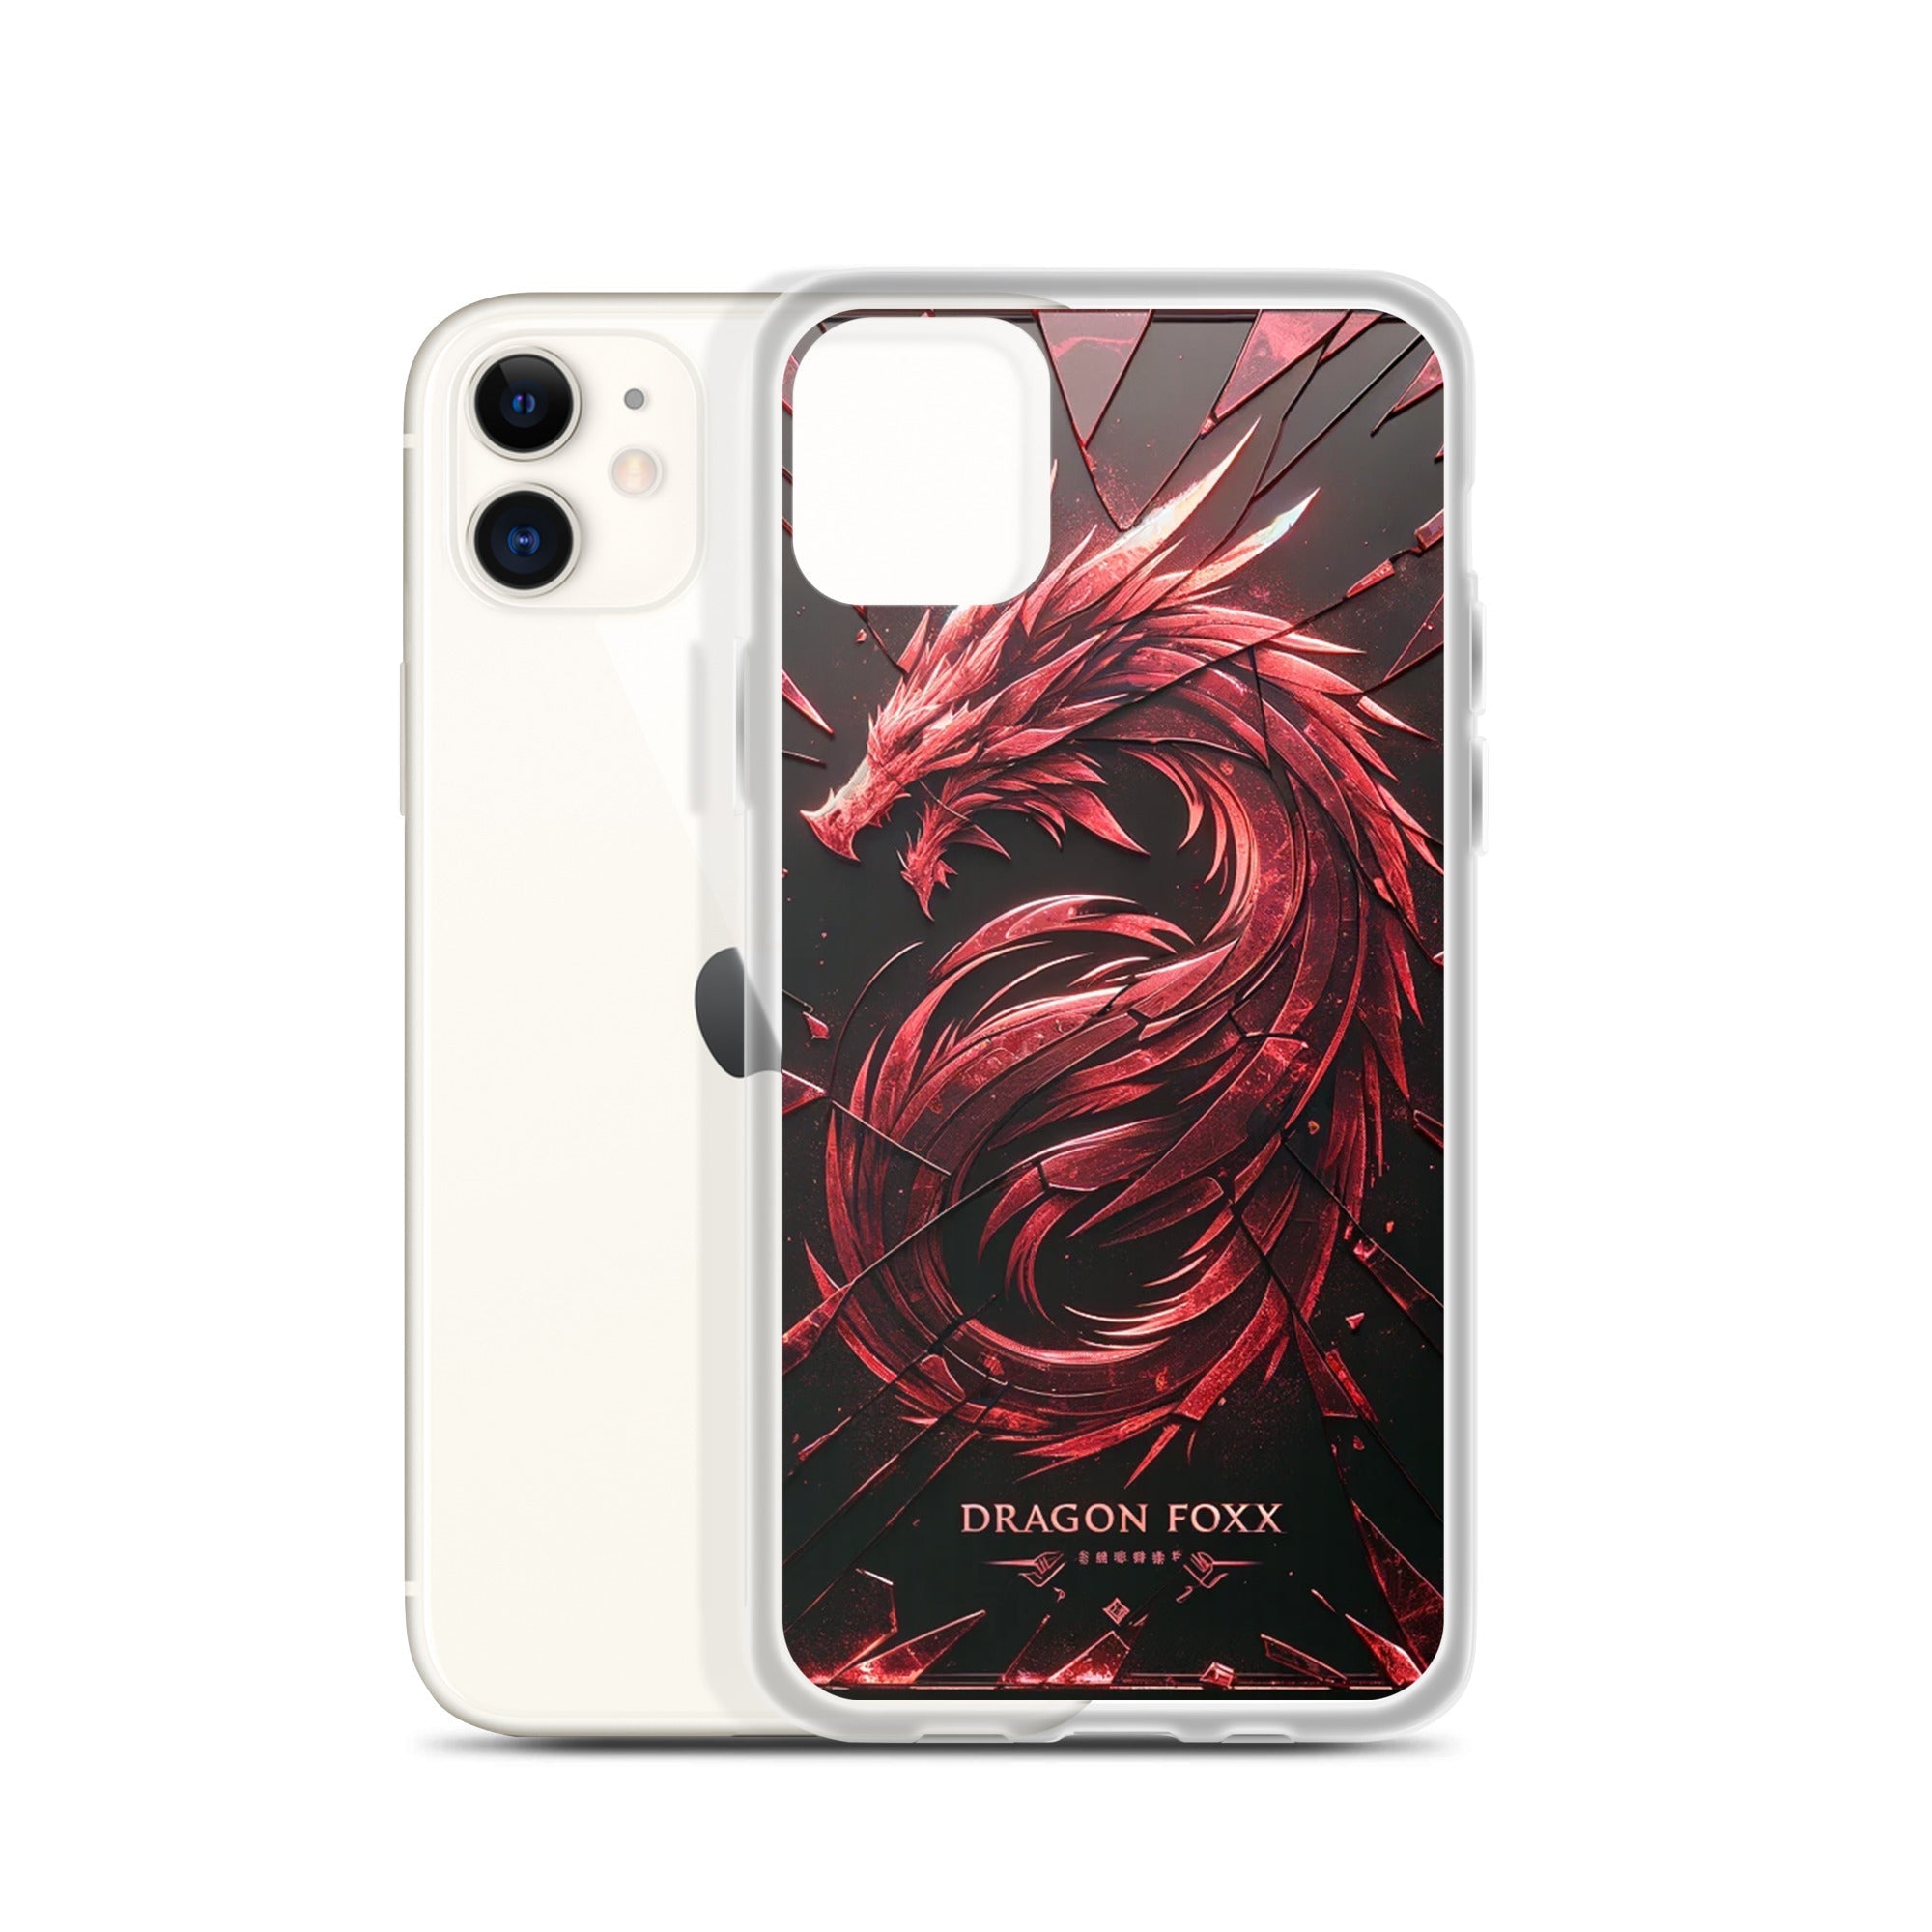 DRAGON FOXX™ Red Dragon Phone Case for iPhone® - Phone Case for iPhone® - DRAGON FOXX™ - DRAGON FOXX™ Red Dragon Phone Case for iPhone® - 7805351_10994 - iPhone 11 - Red/Black/Clear - Accessories - Dragon Foxx™ - DRAGON FOXX™ Phone Case for iPhone®